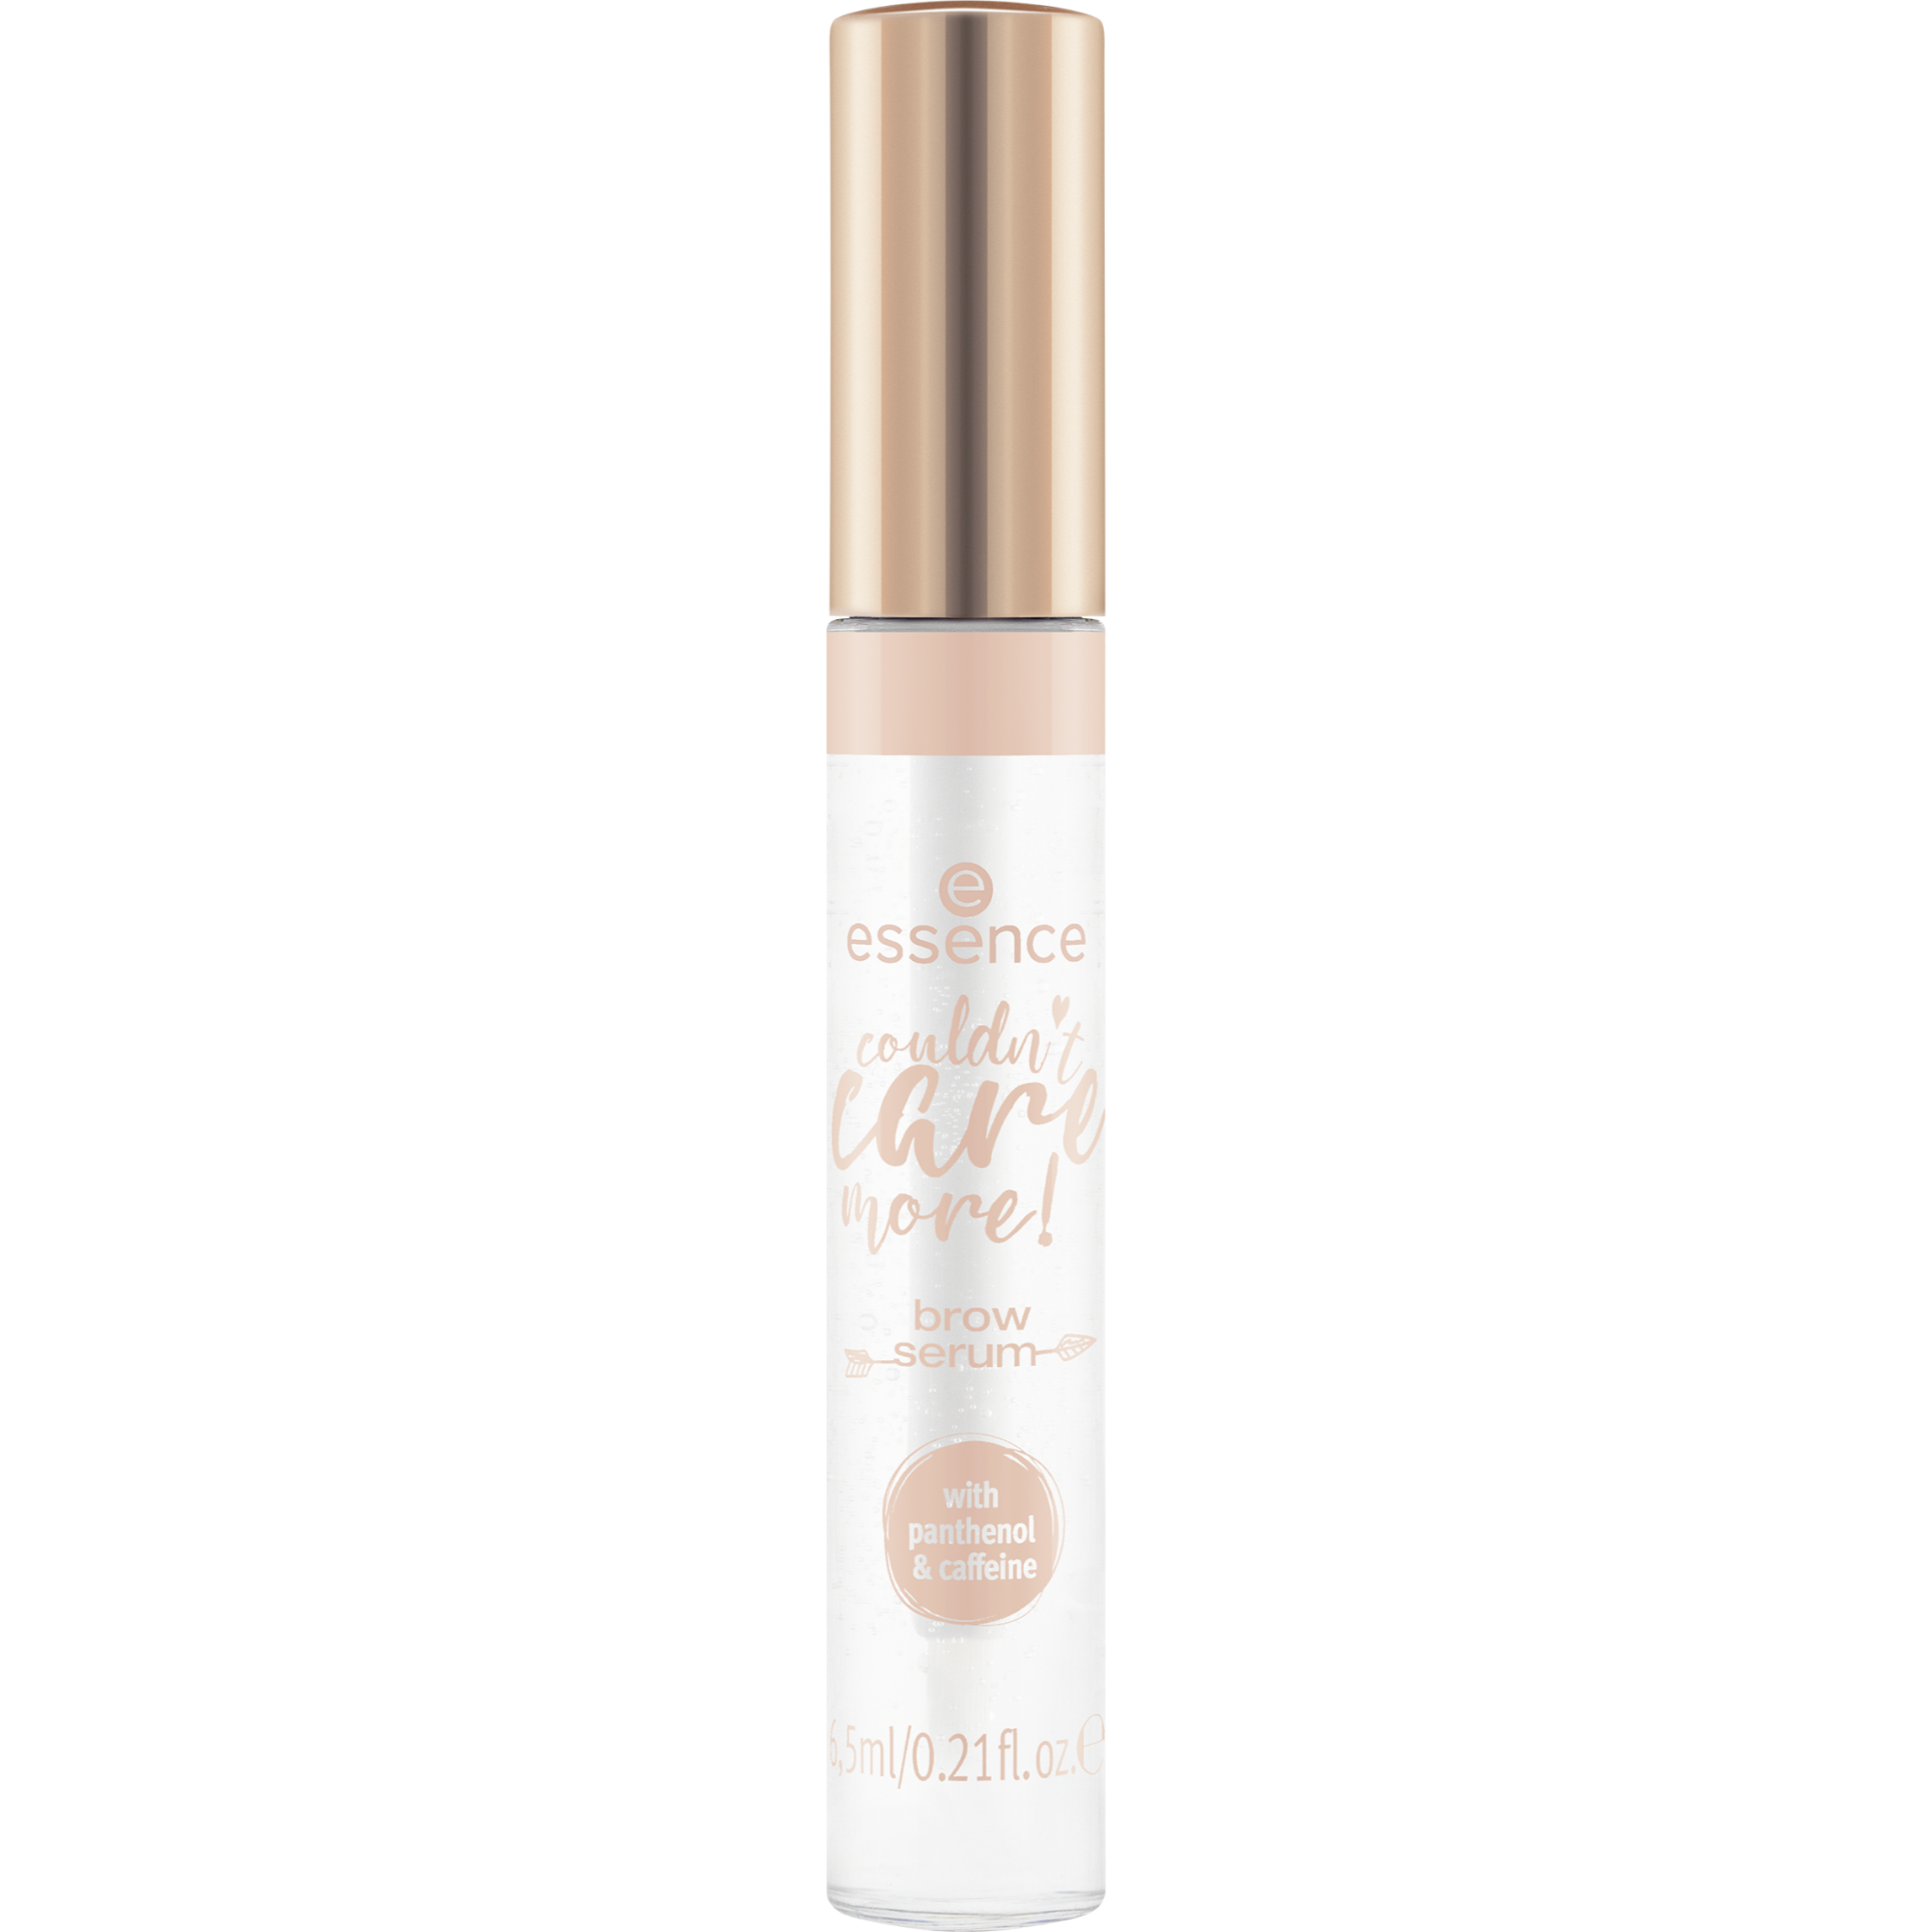 couldn't care more! brow serum